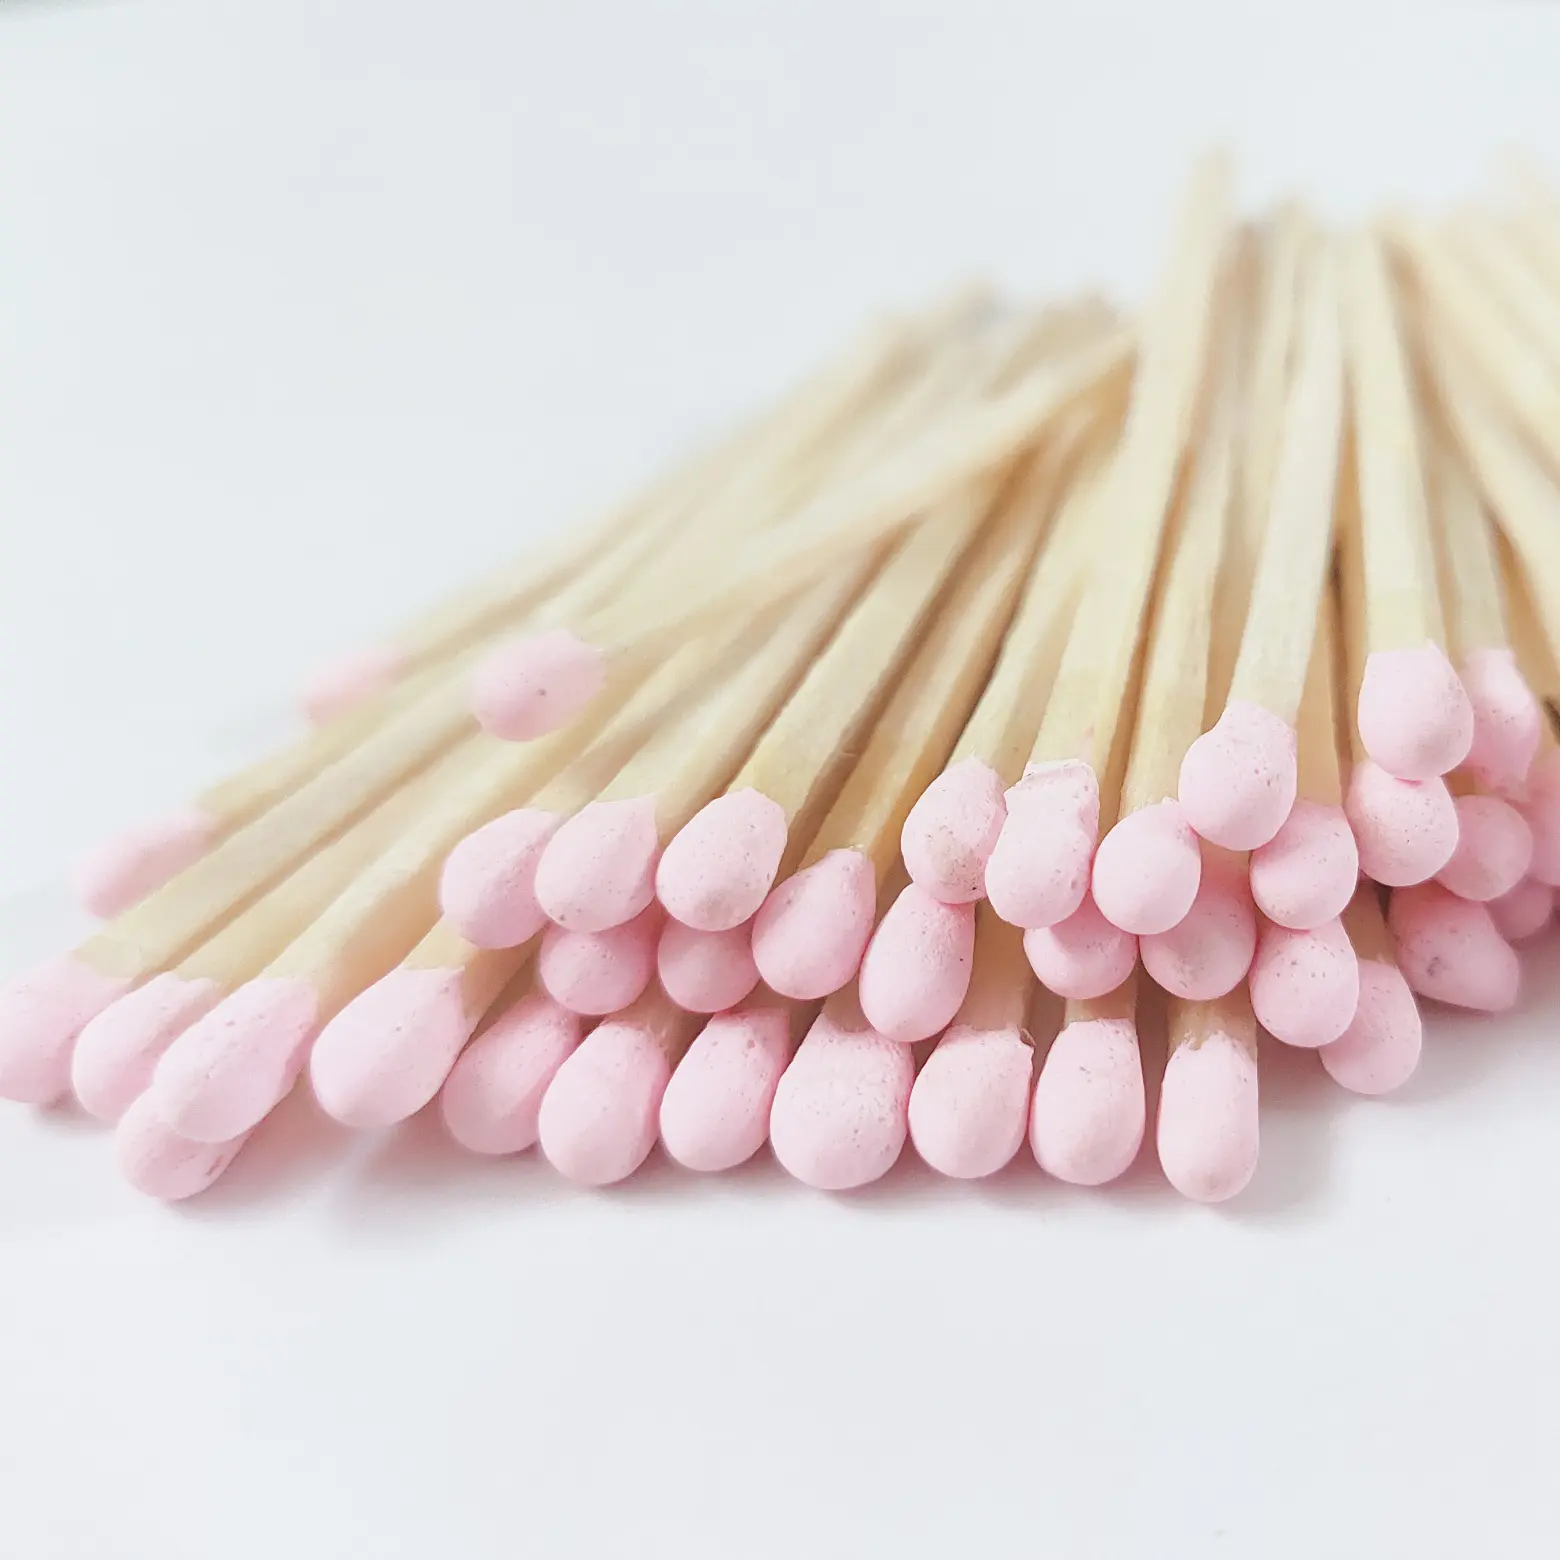 High quality 4 inch bulk loose long match sticks for candle